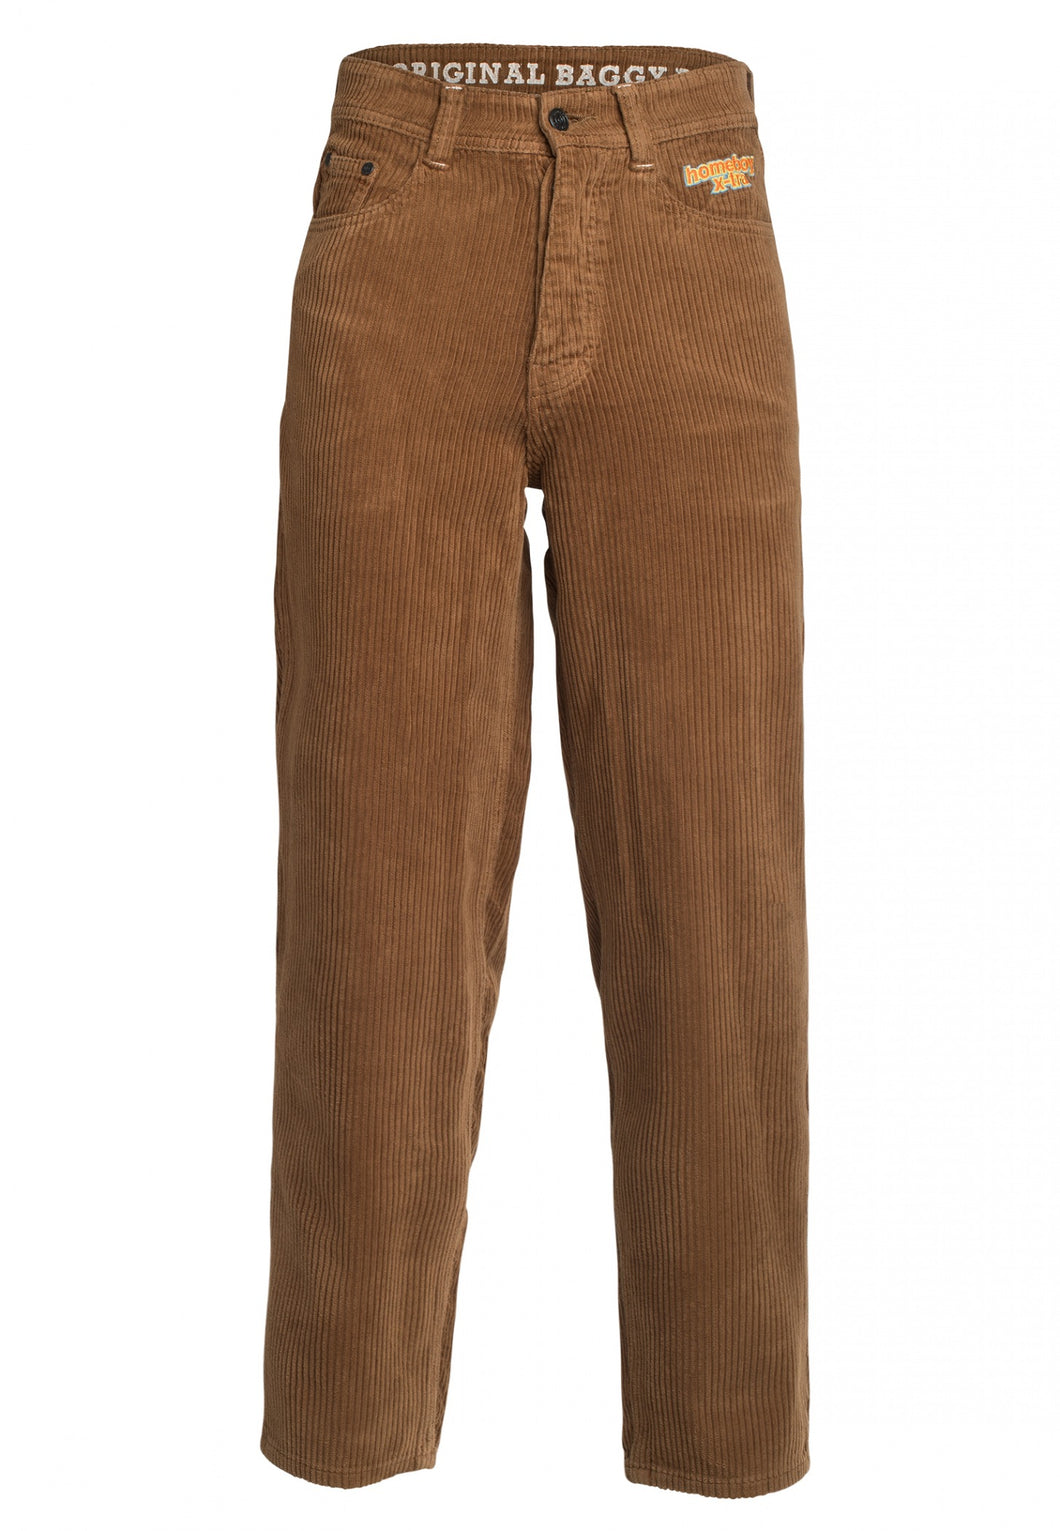 Homeboy x-tra BAGGY CORD Pants Brown